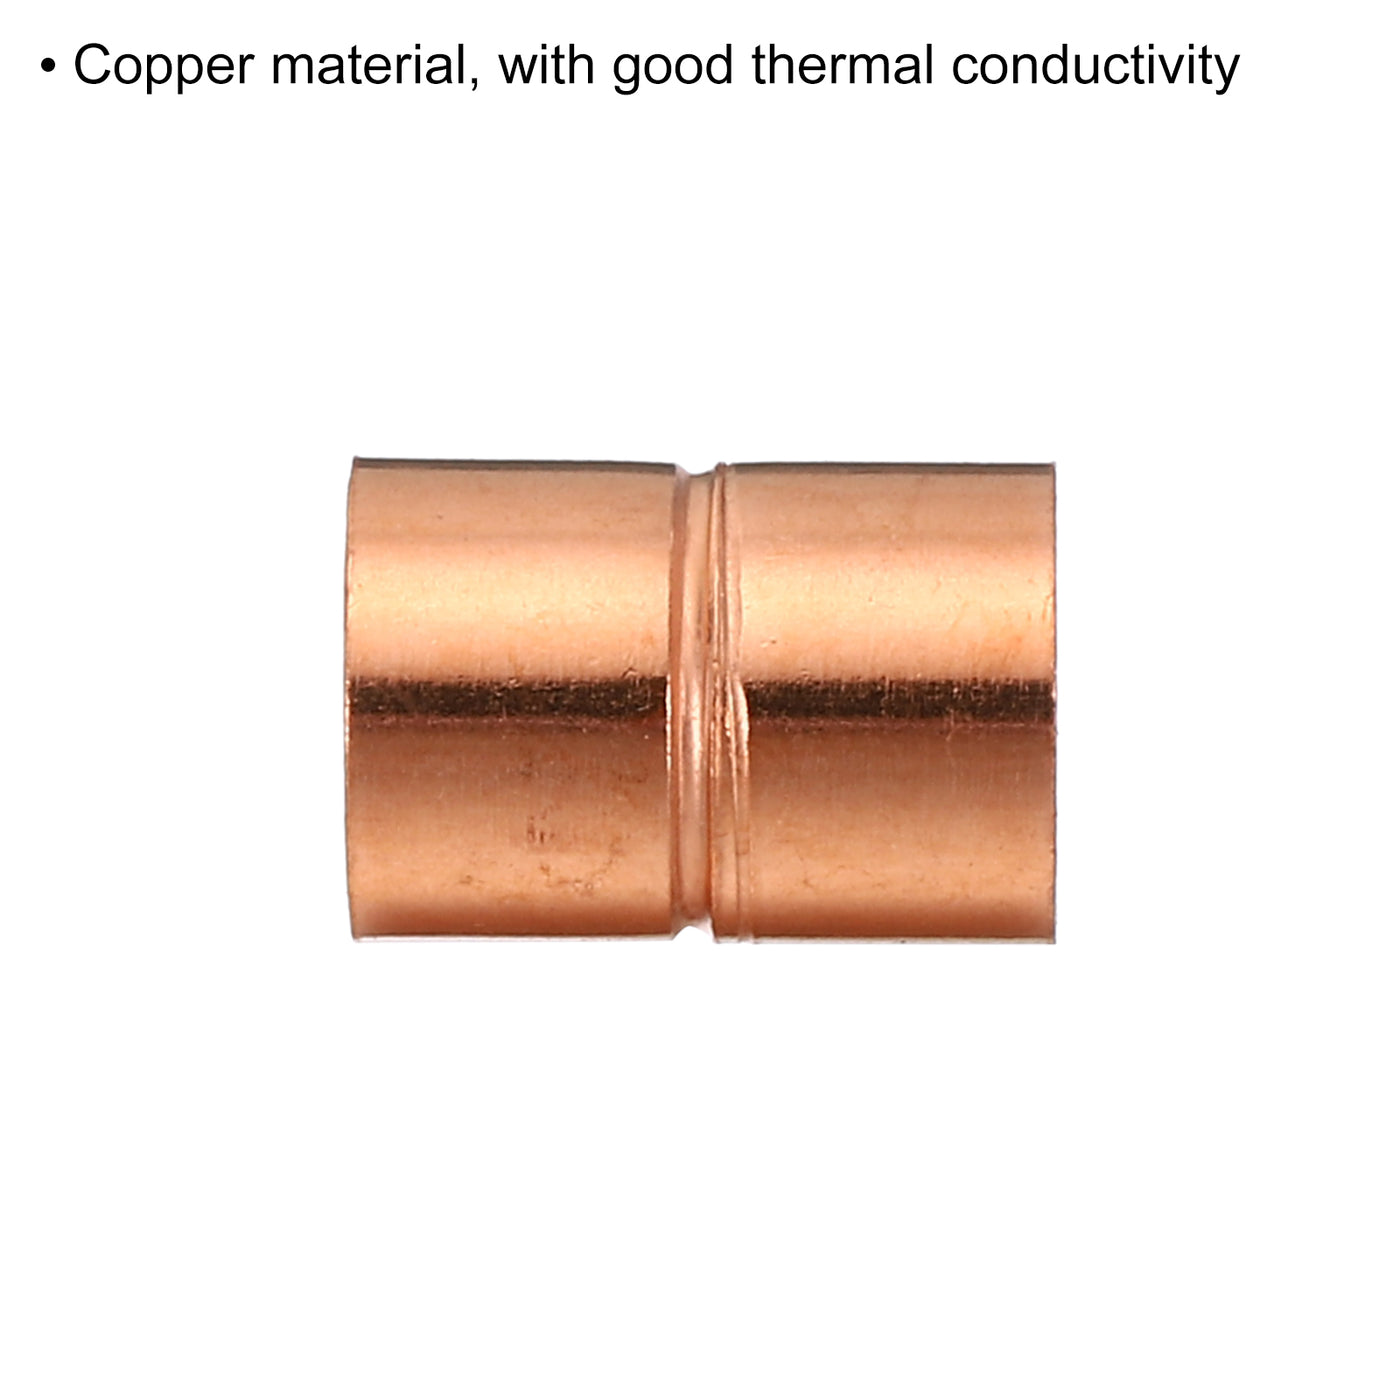 Harfington 3/8 Inch ID Straight Copper Coupling, 6 Pack Sweat End Welding Joint Pipe Fitting with Rolled Tube Stop for Water Air Conditioner Plumbing